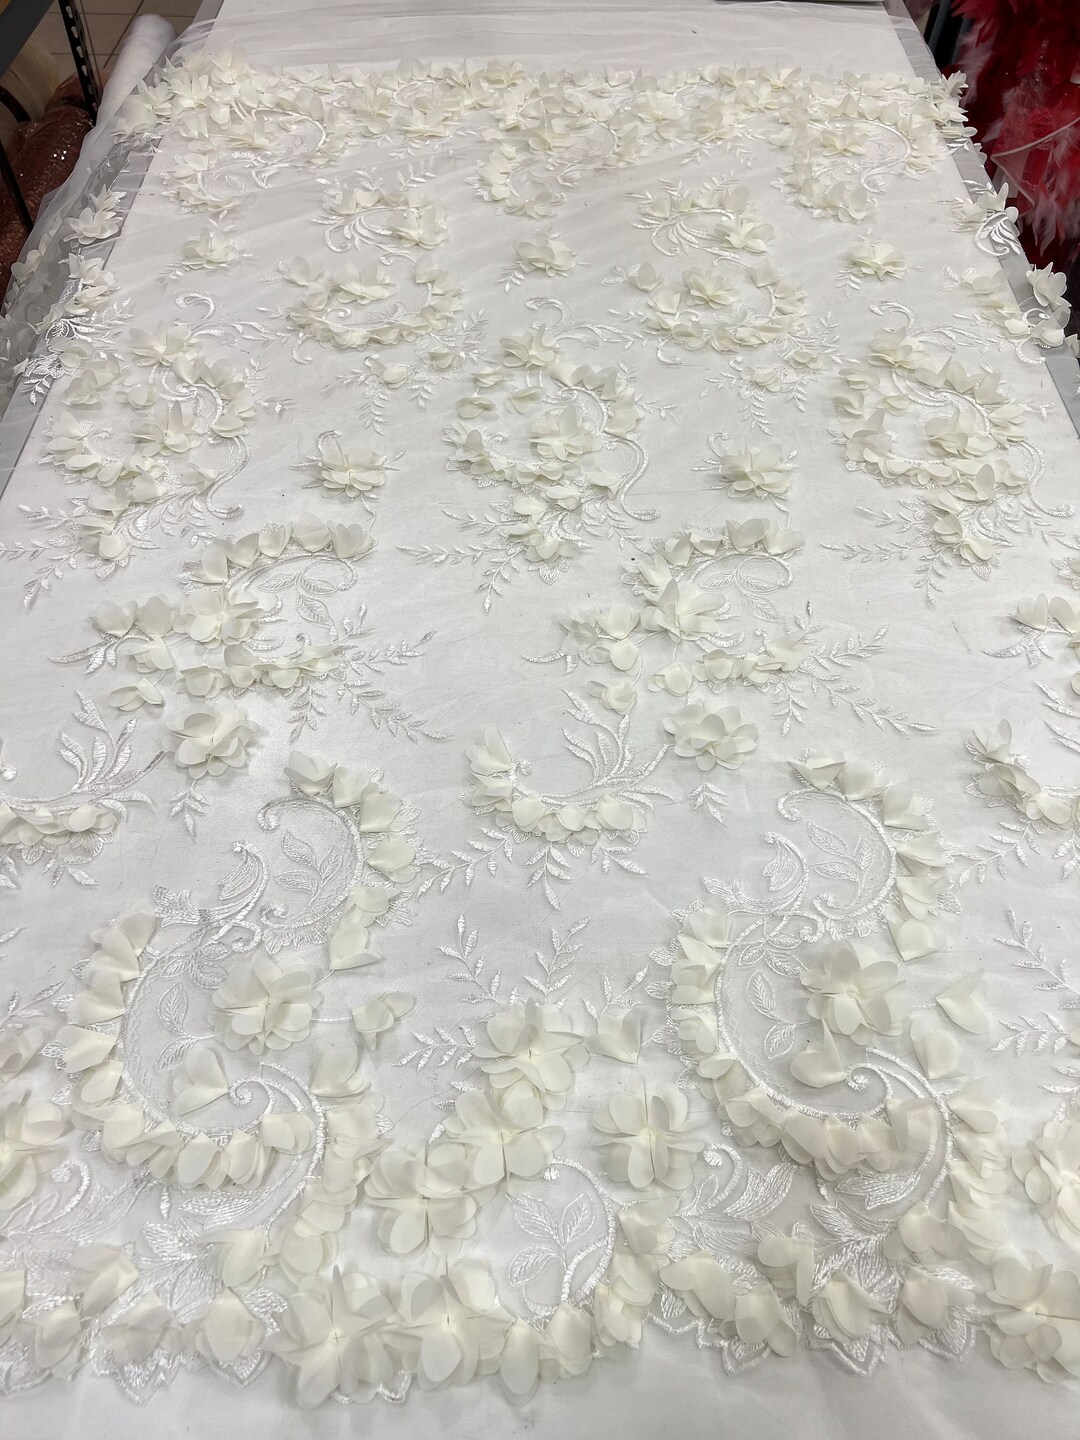 D Flower Off White Lace D Chiffon Fowers And Emberoidery On Super